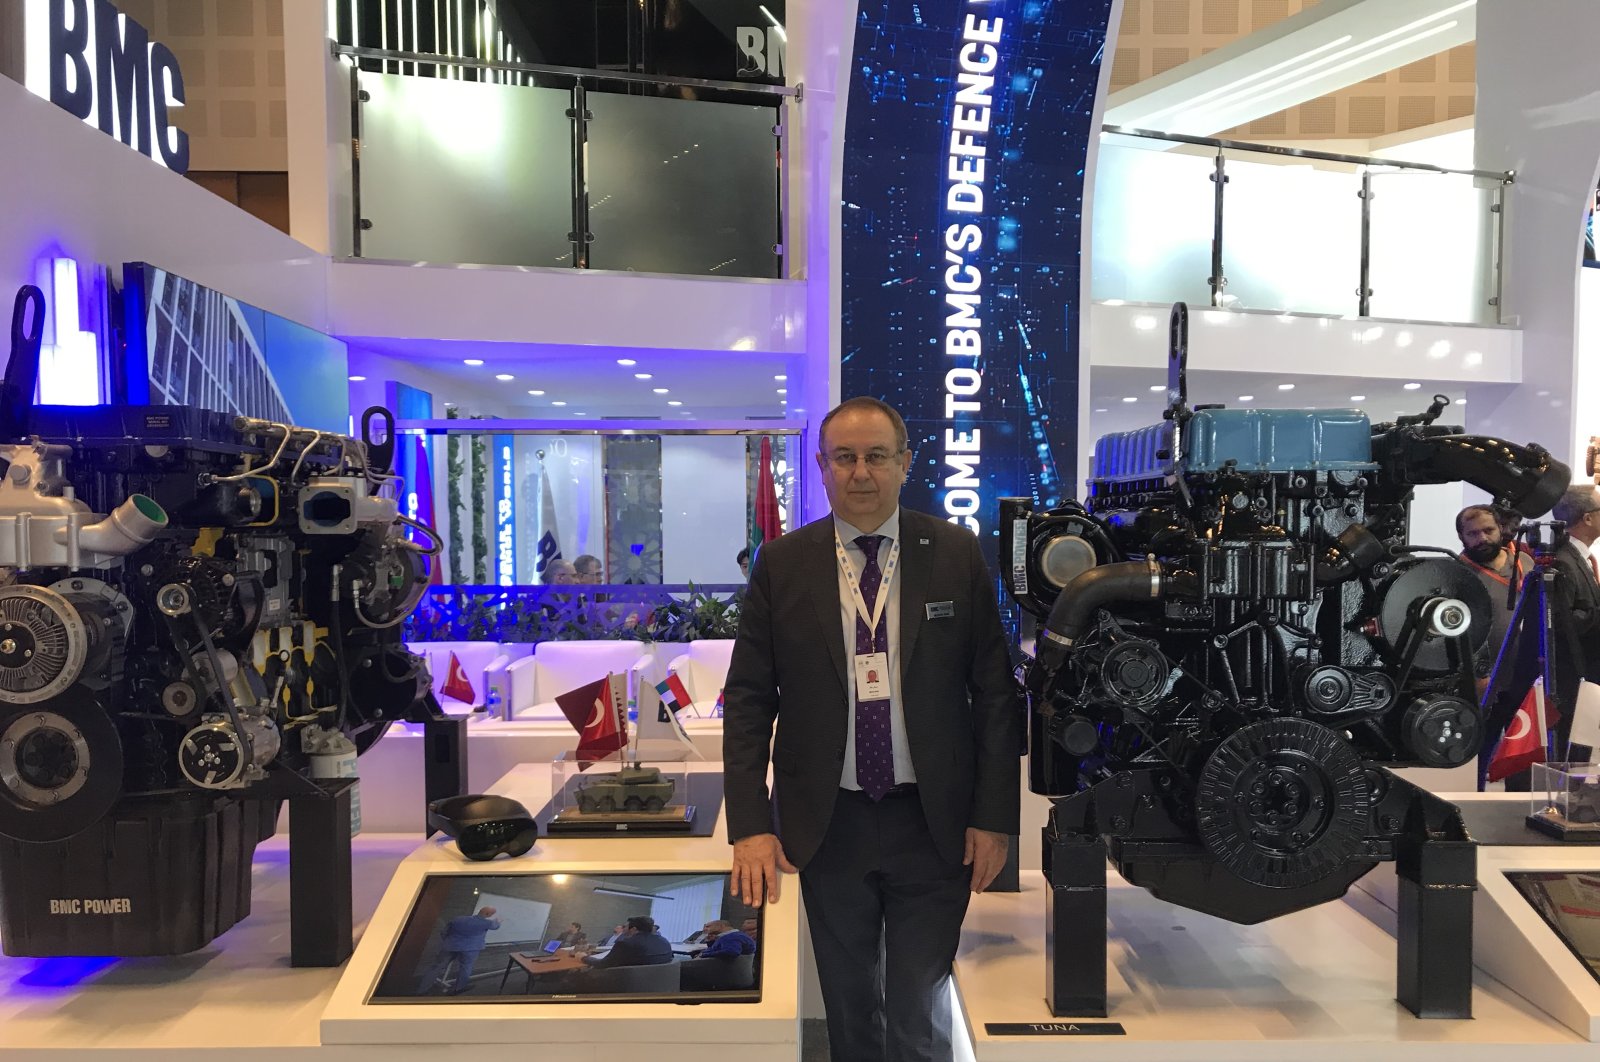 Turkey’s BMC Power’s domestic military engine unveiled at the UAE exhibition